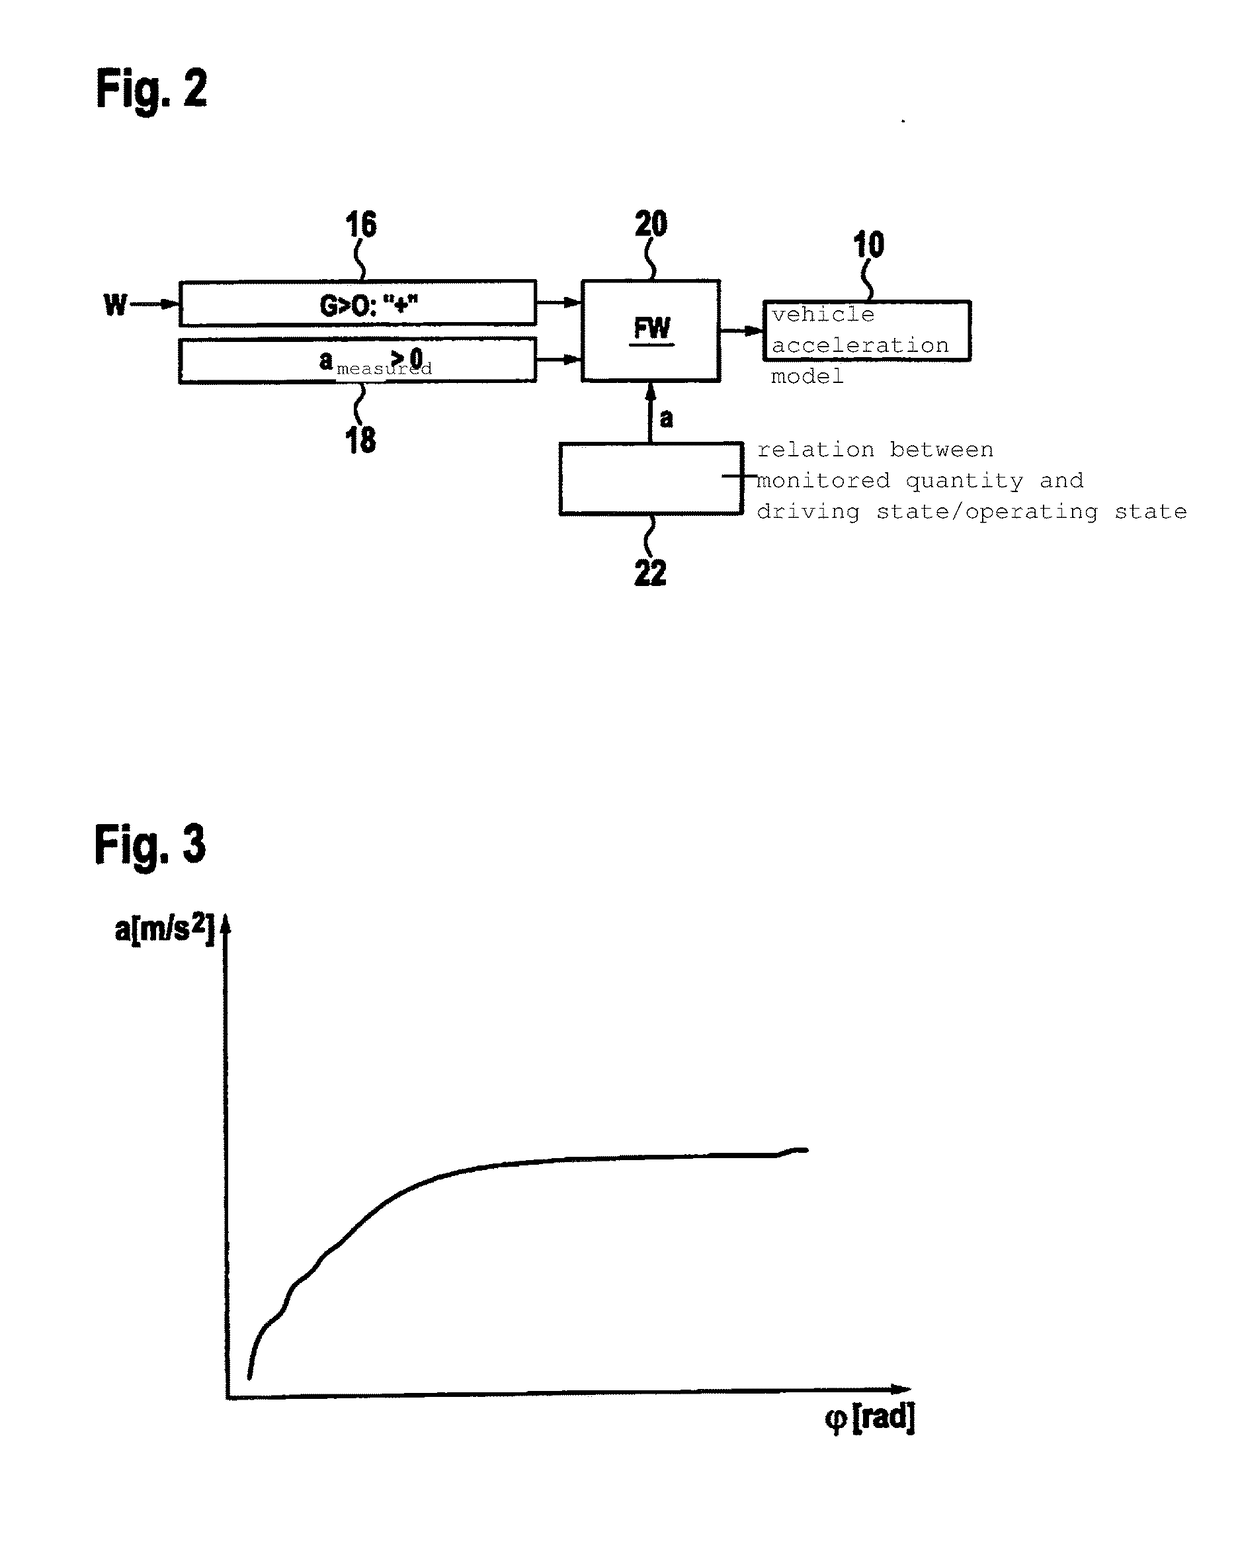 Method for monitoring a drive-by-wire system of a motor vehicle